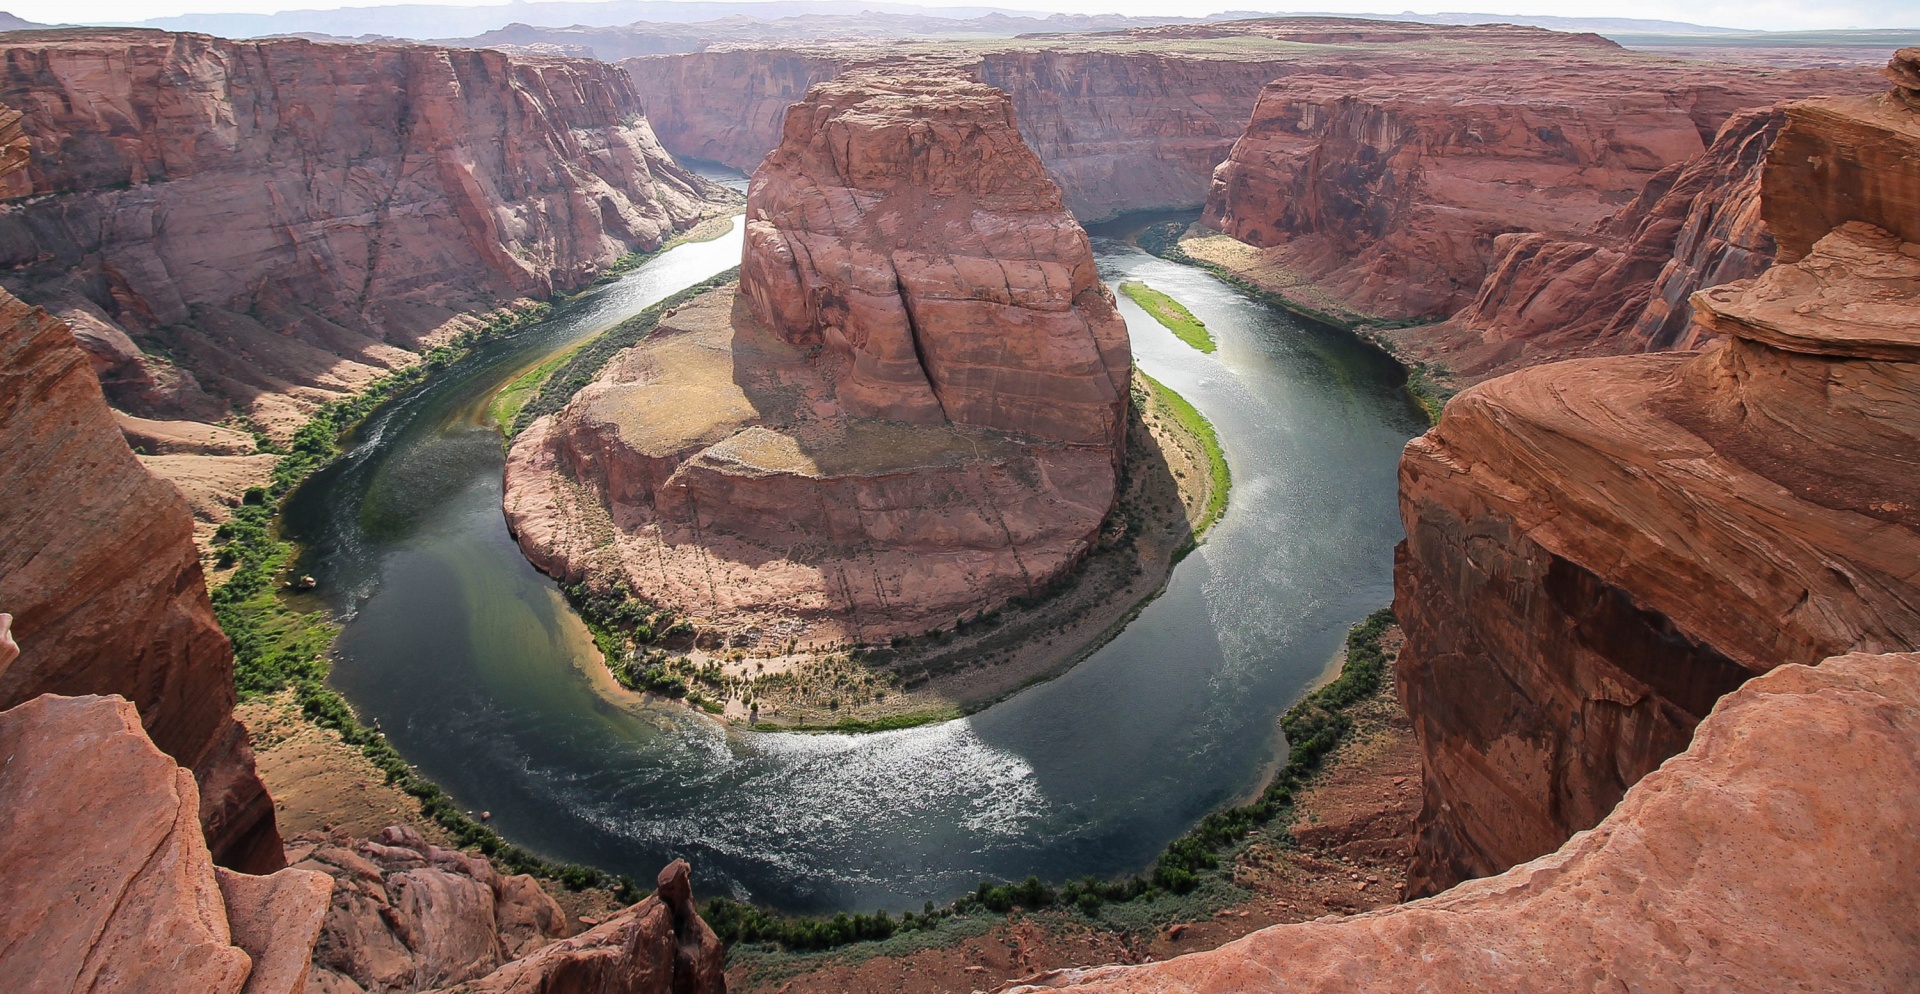 Horseshoe-shaped Meander of the Colorado River in Arizona